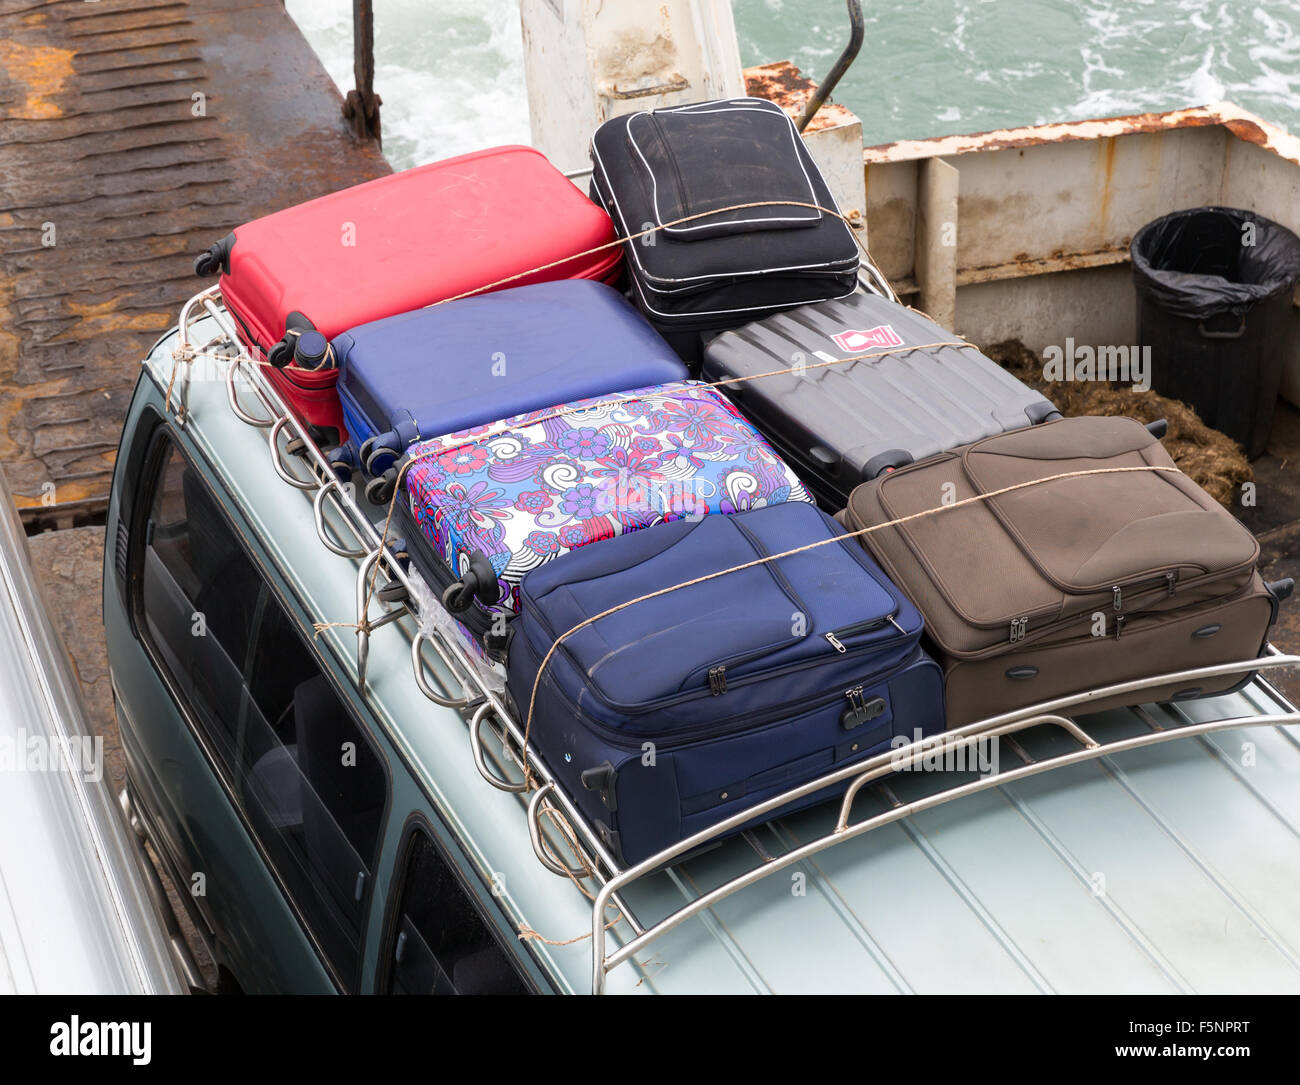 Suitcases on the roof of a car Stock Photo - Alamy